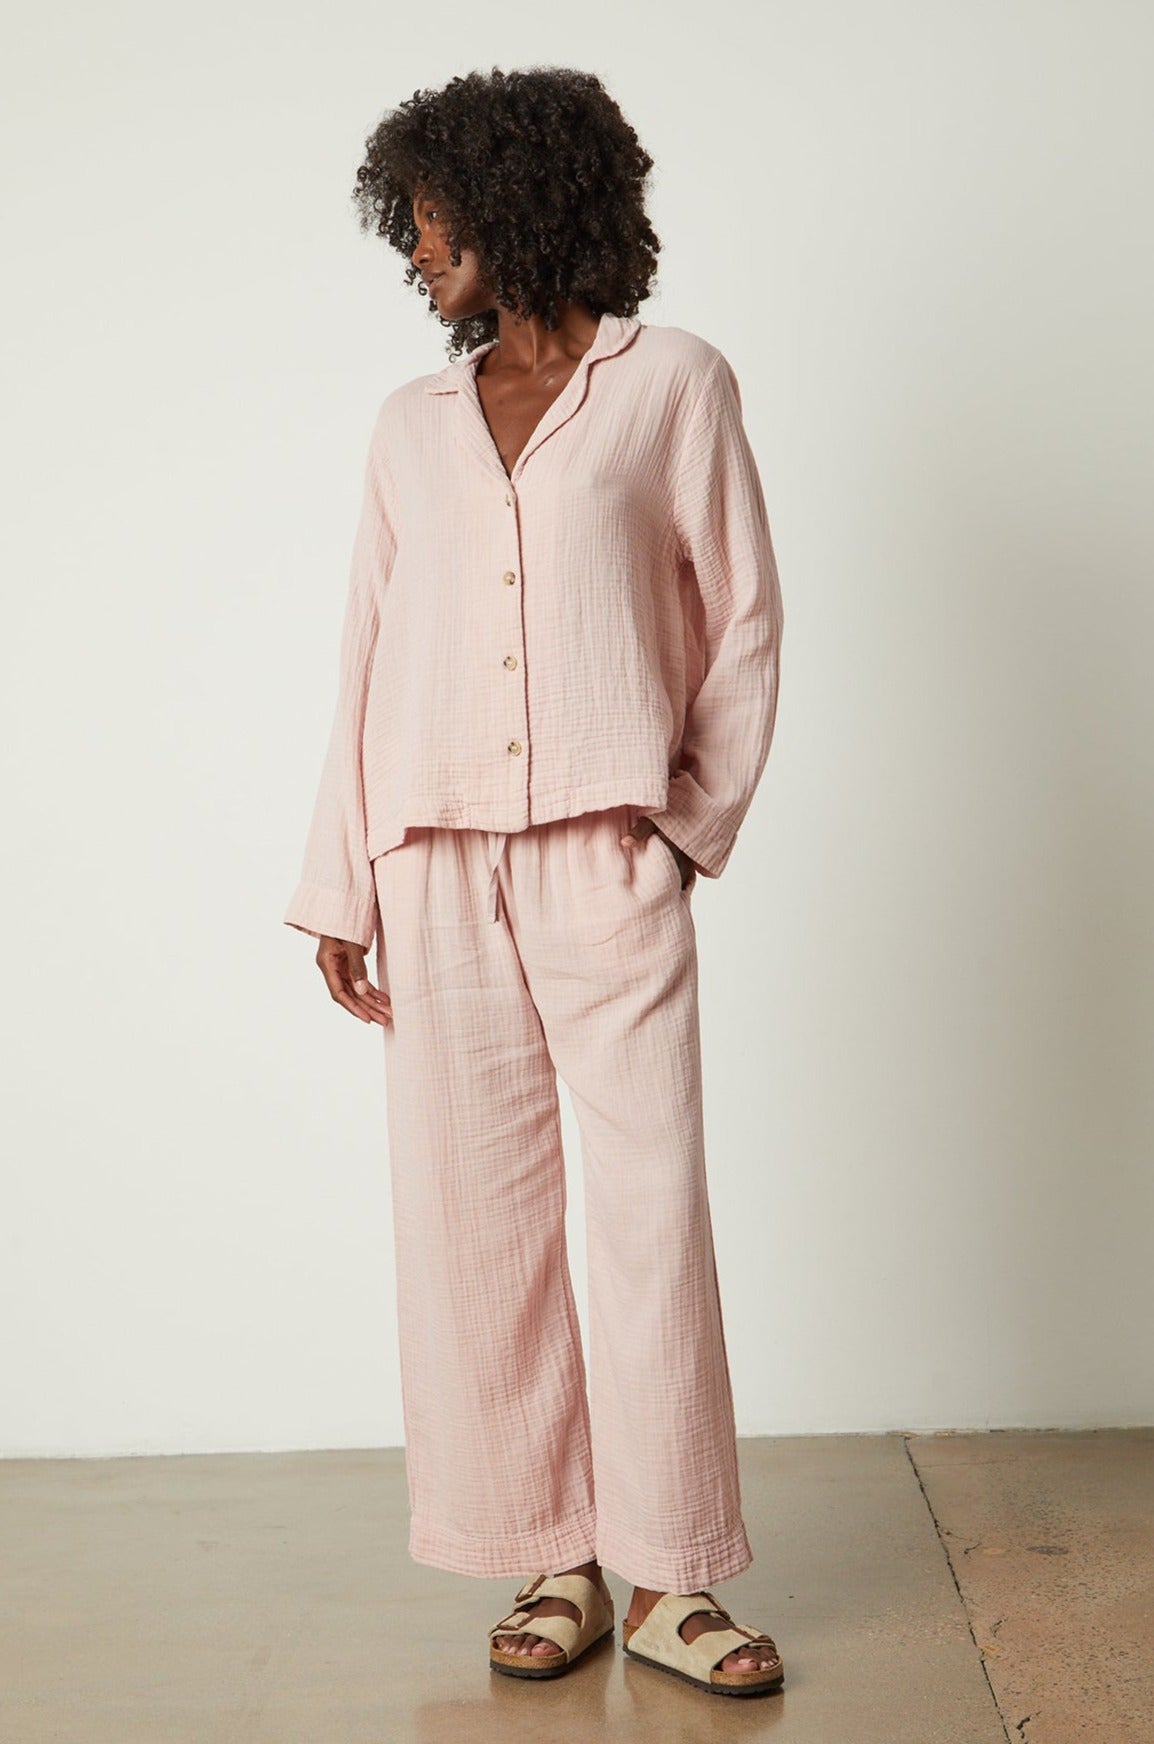   The model is wearing a pink linen pajama pant set from Jenny Graham Home. 